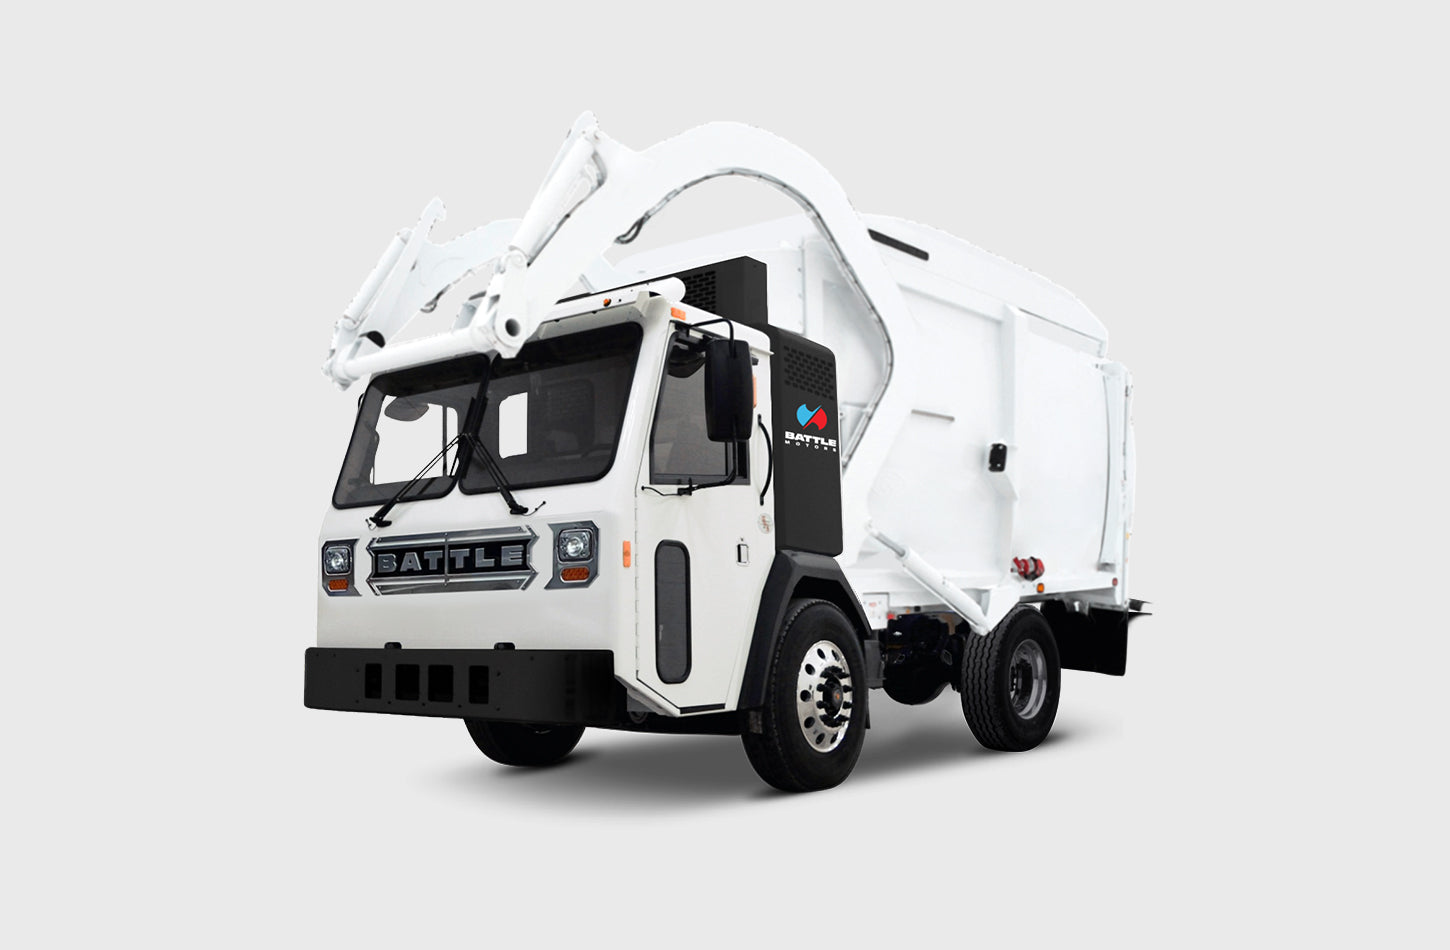 From Making The Best Garbage Truck To Making The Best EV Garbage Truck